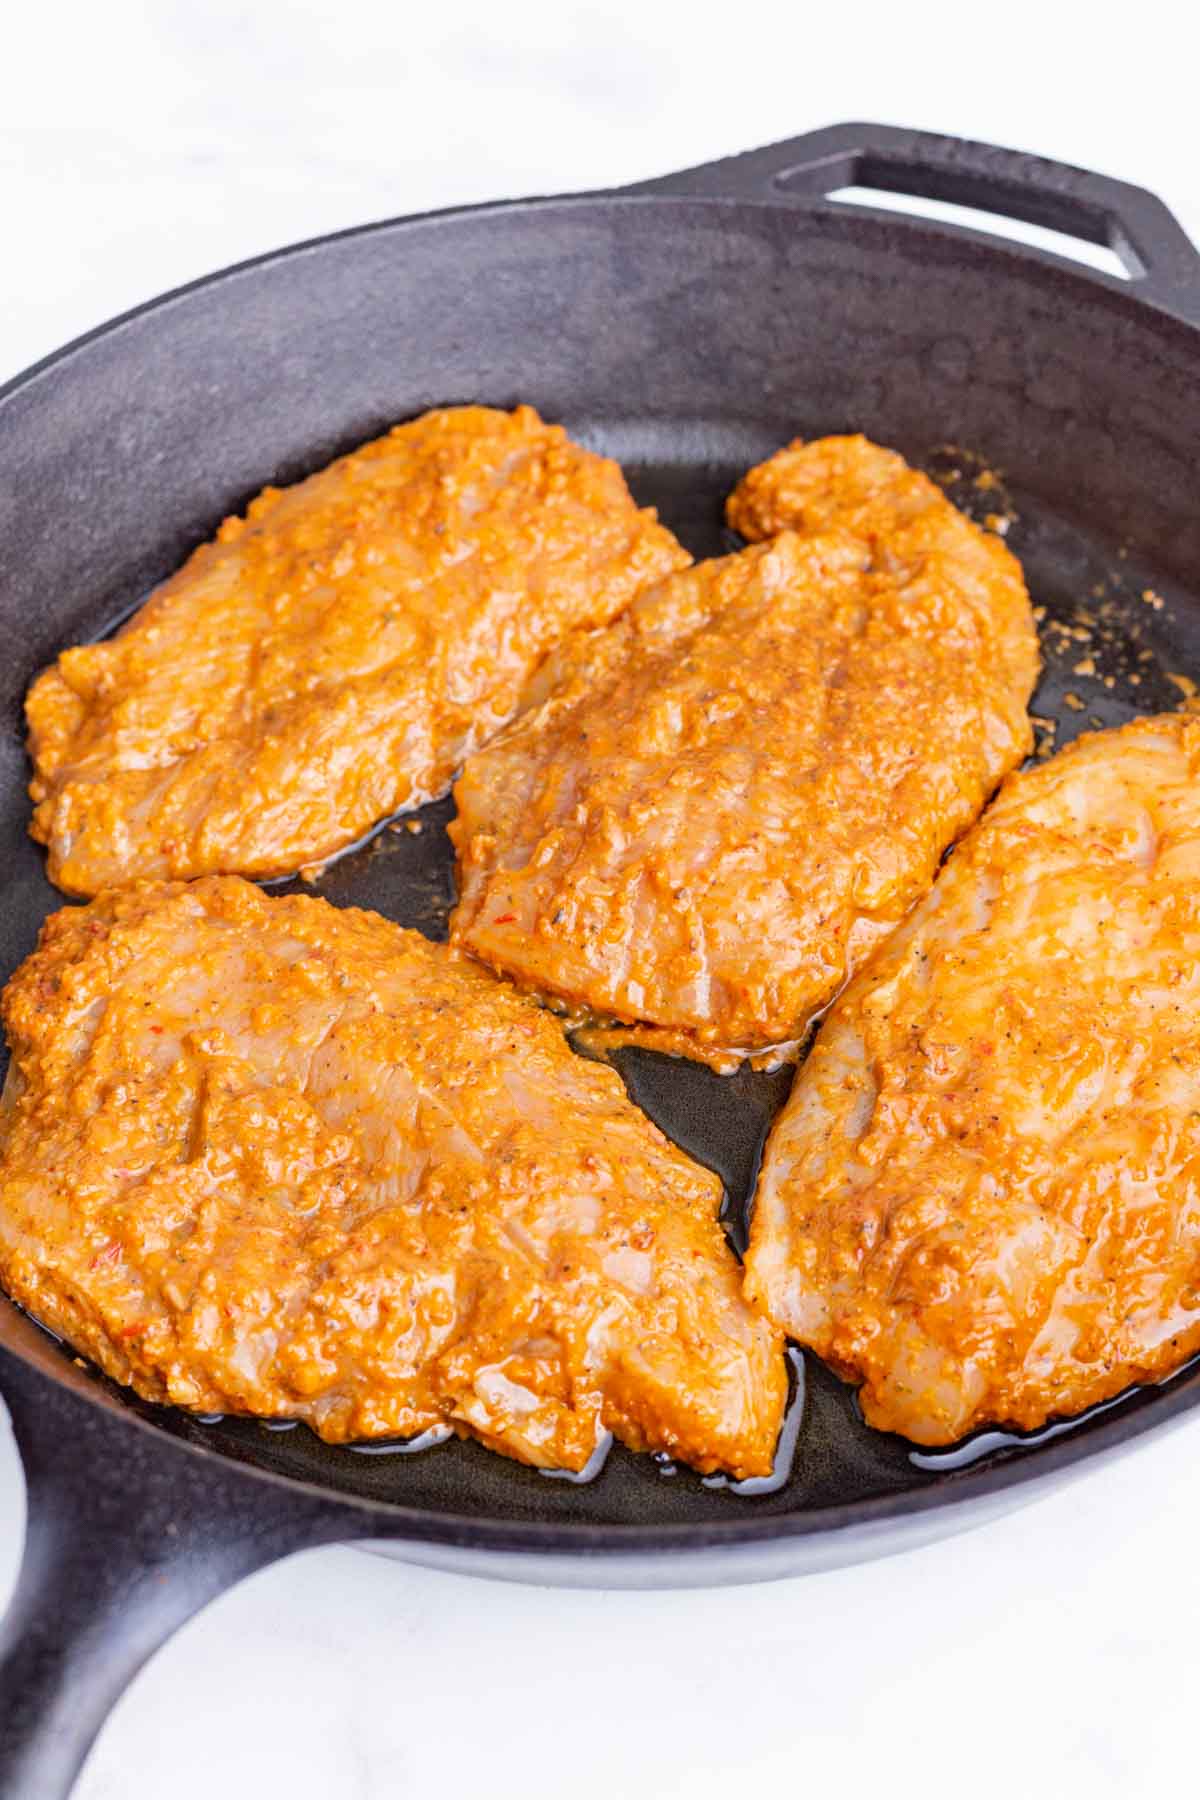 Marinated chicken breasts are cooked in a skillet.